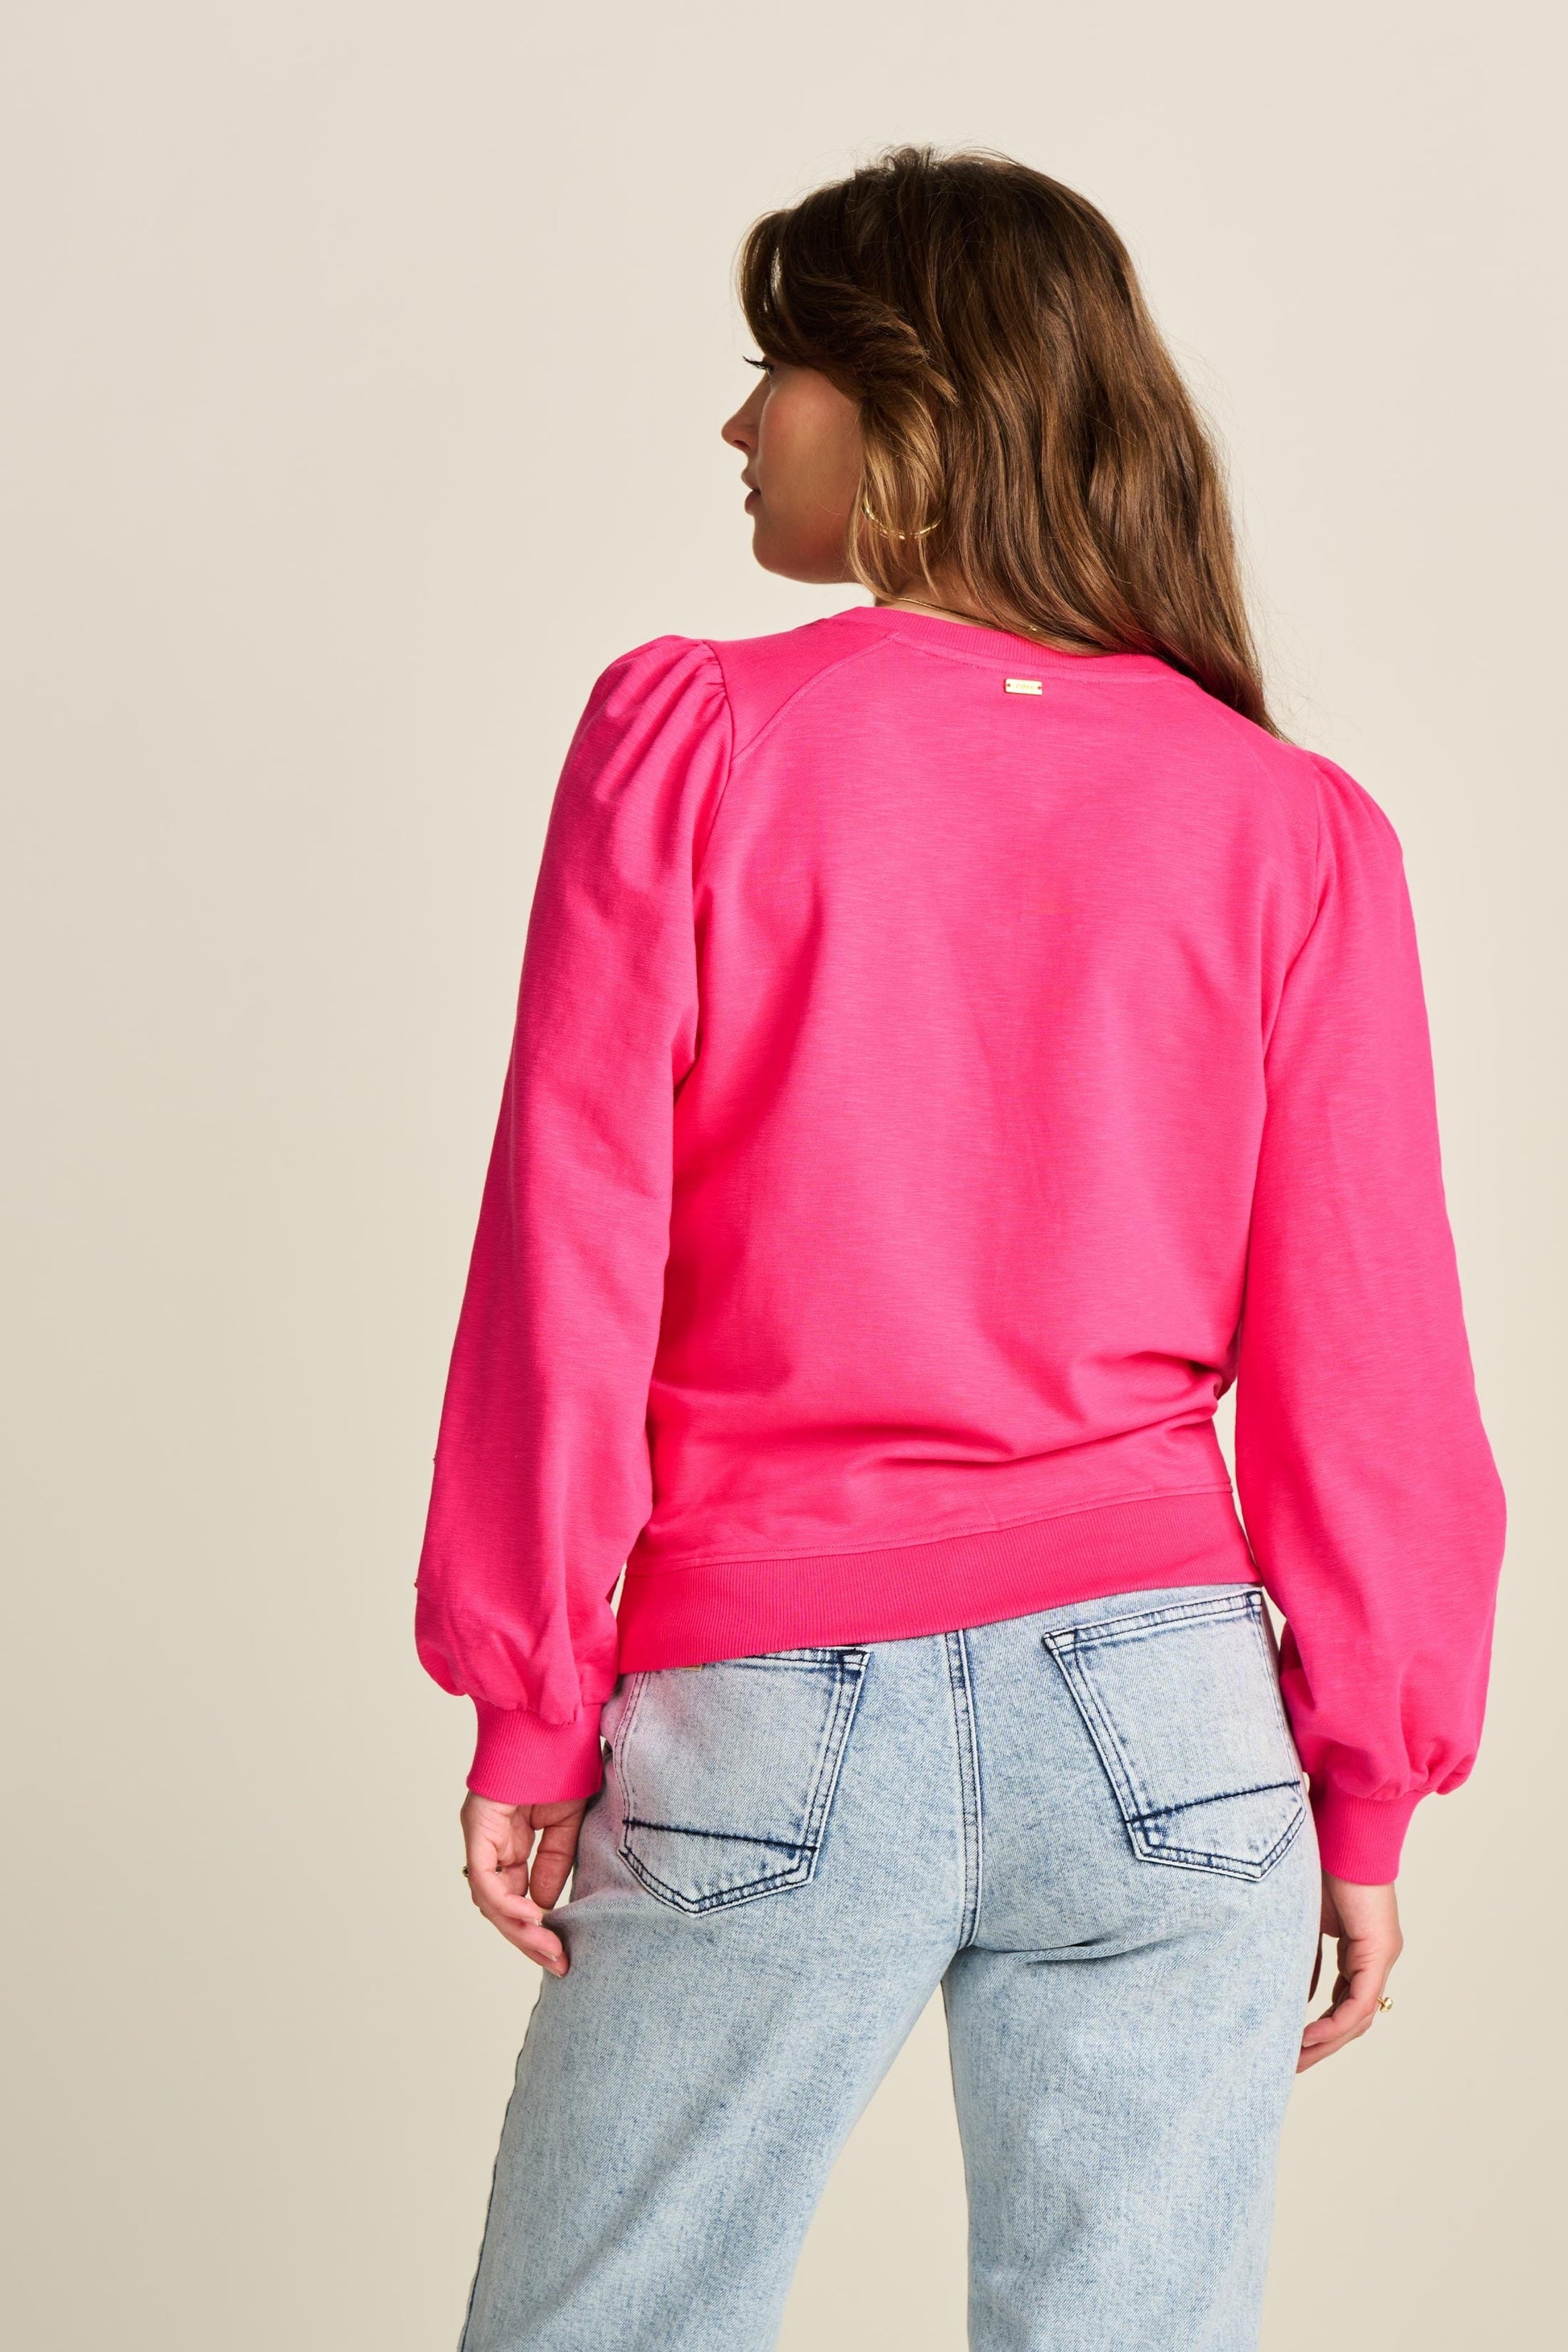 POM Amsterdam Sweaters PULLOVER - Pink Glow